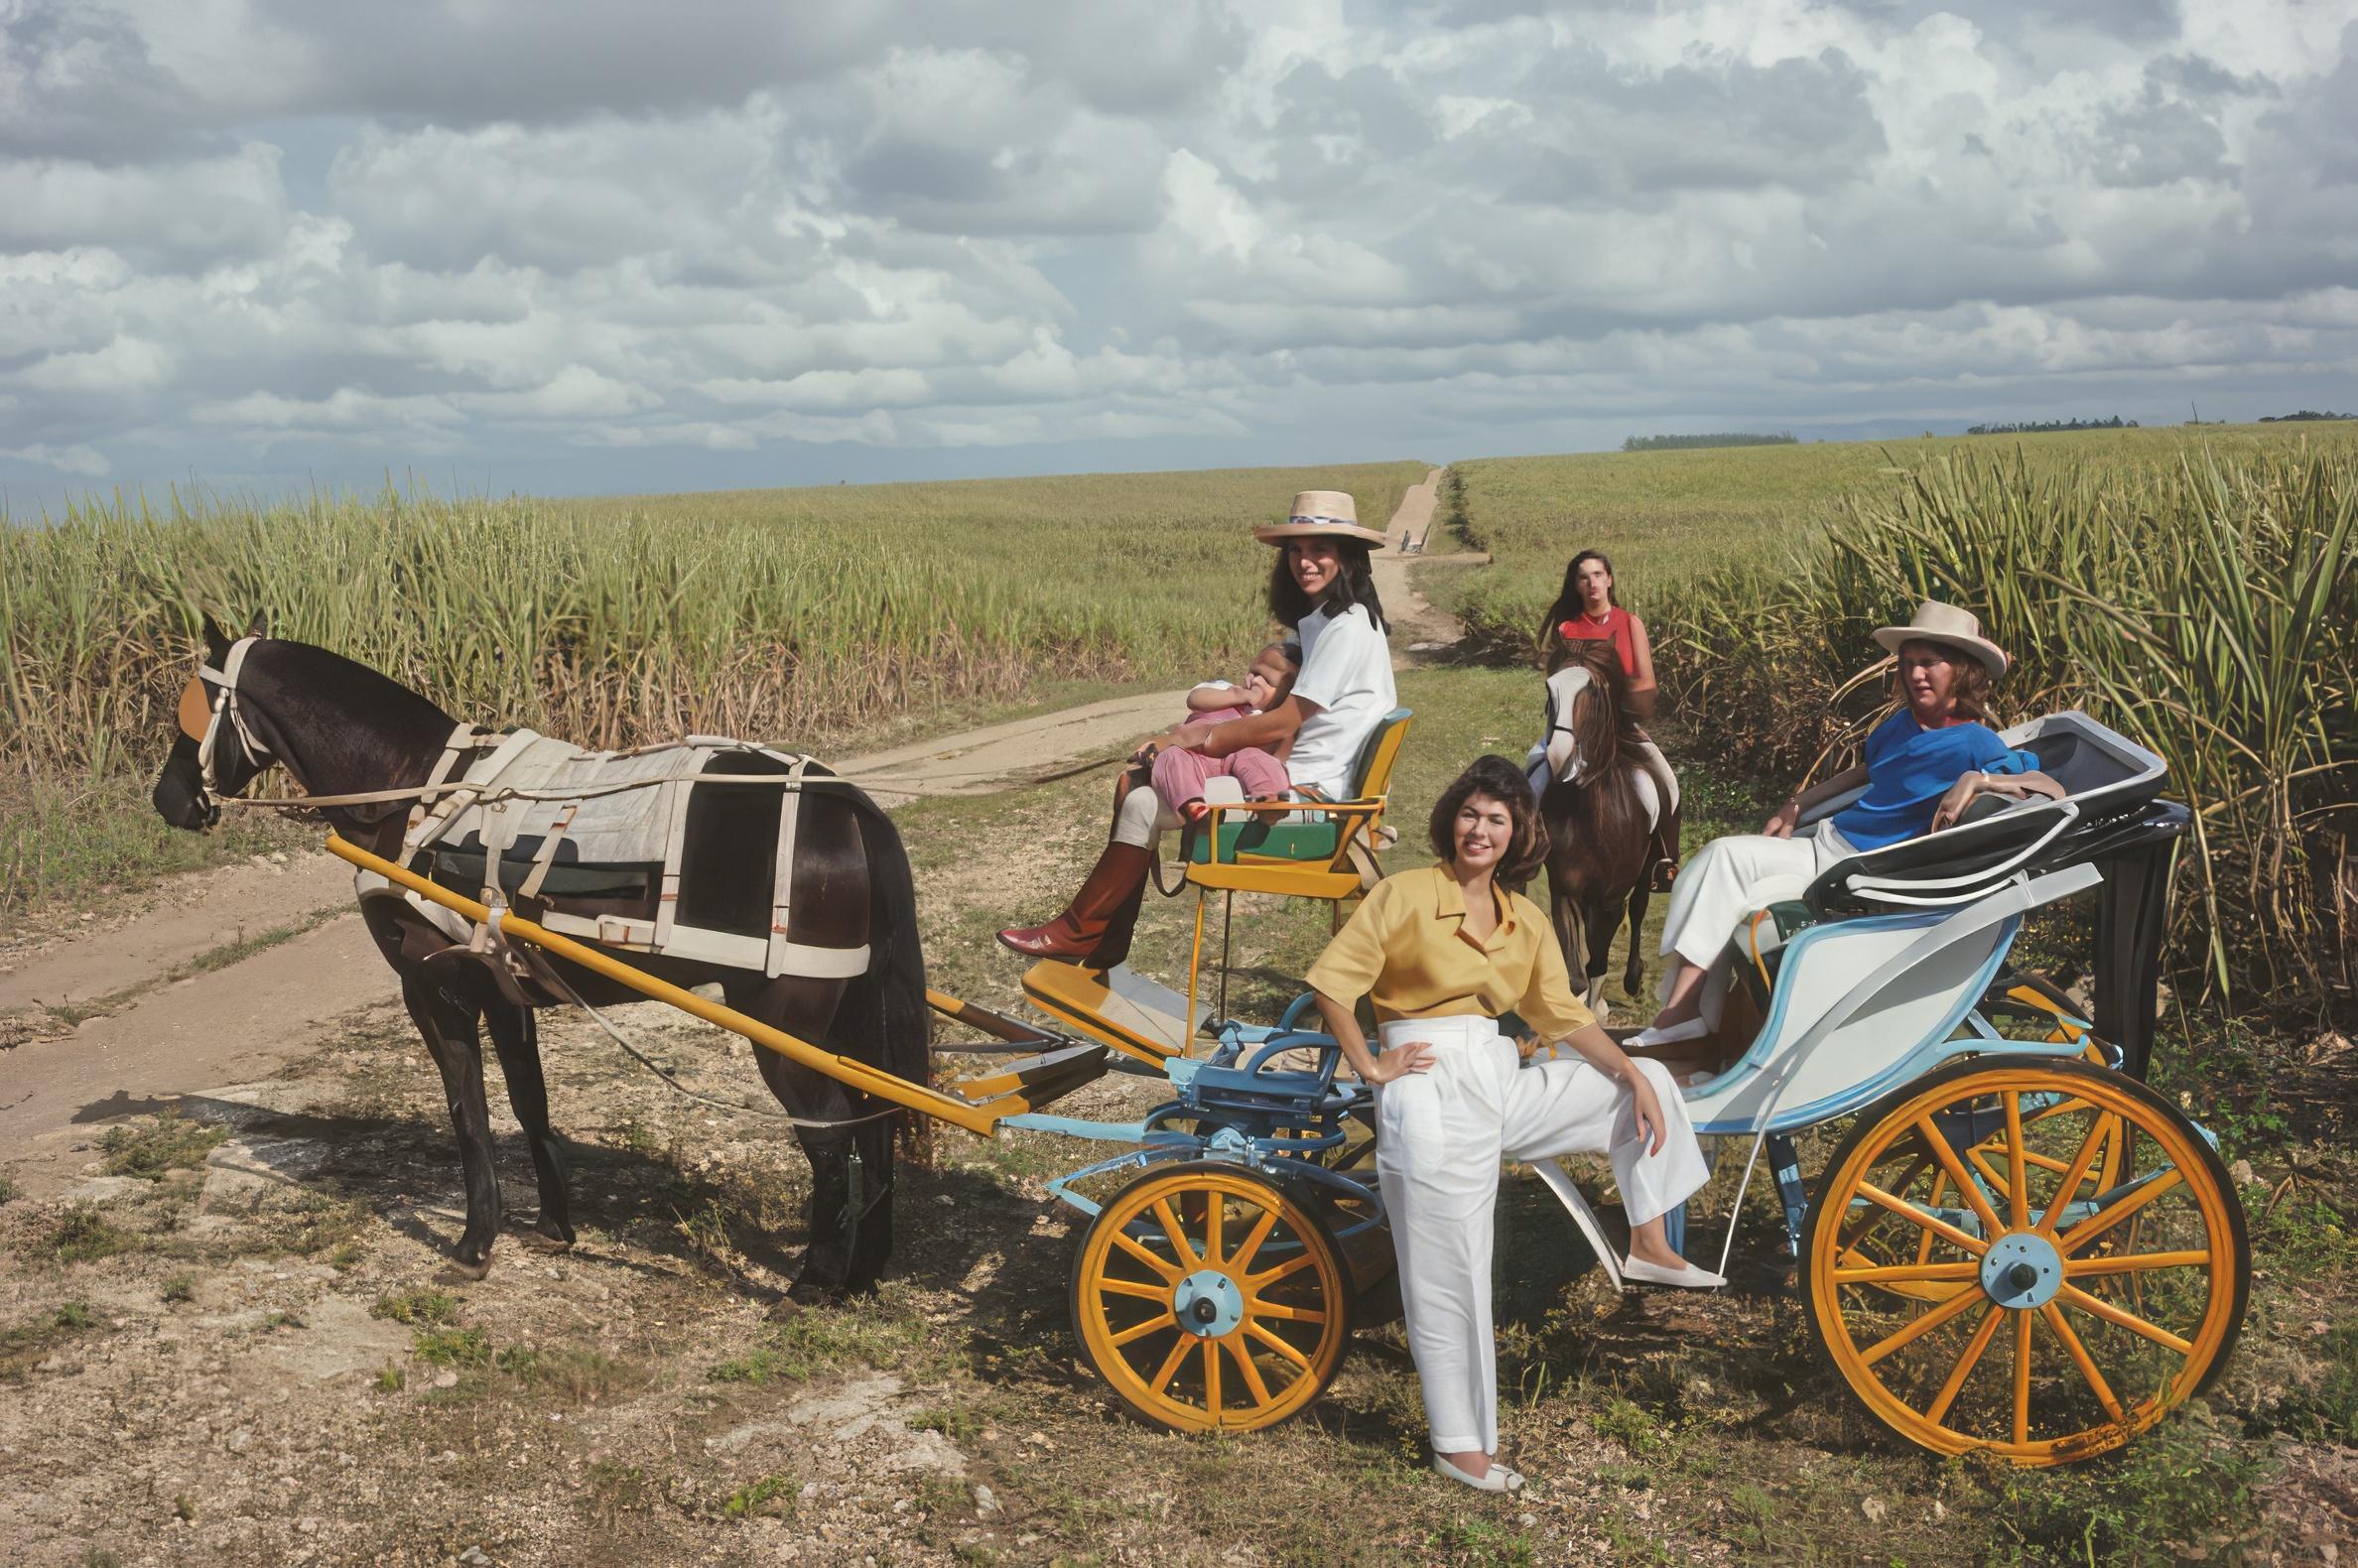 Slim Aarons
Fanjul family outing
1990 (printed later)
C print
Estate stamped and hand numbered edition of 150 with certificate of authenticity from the estate.   

Members of the Fanjul family out for a ride on a horse and carriage, Casa de Campo,